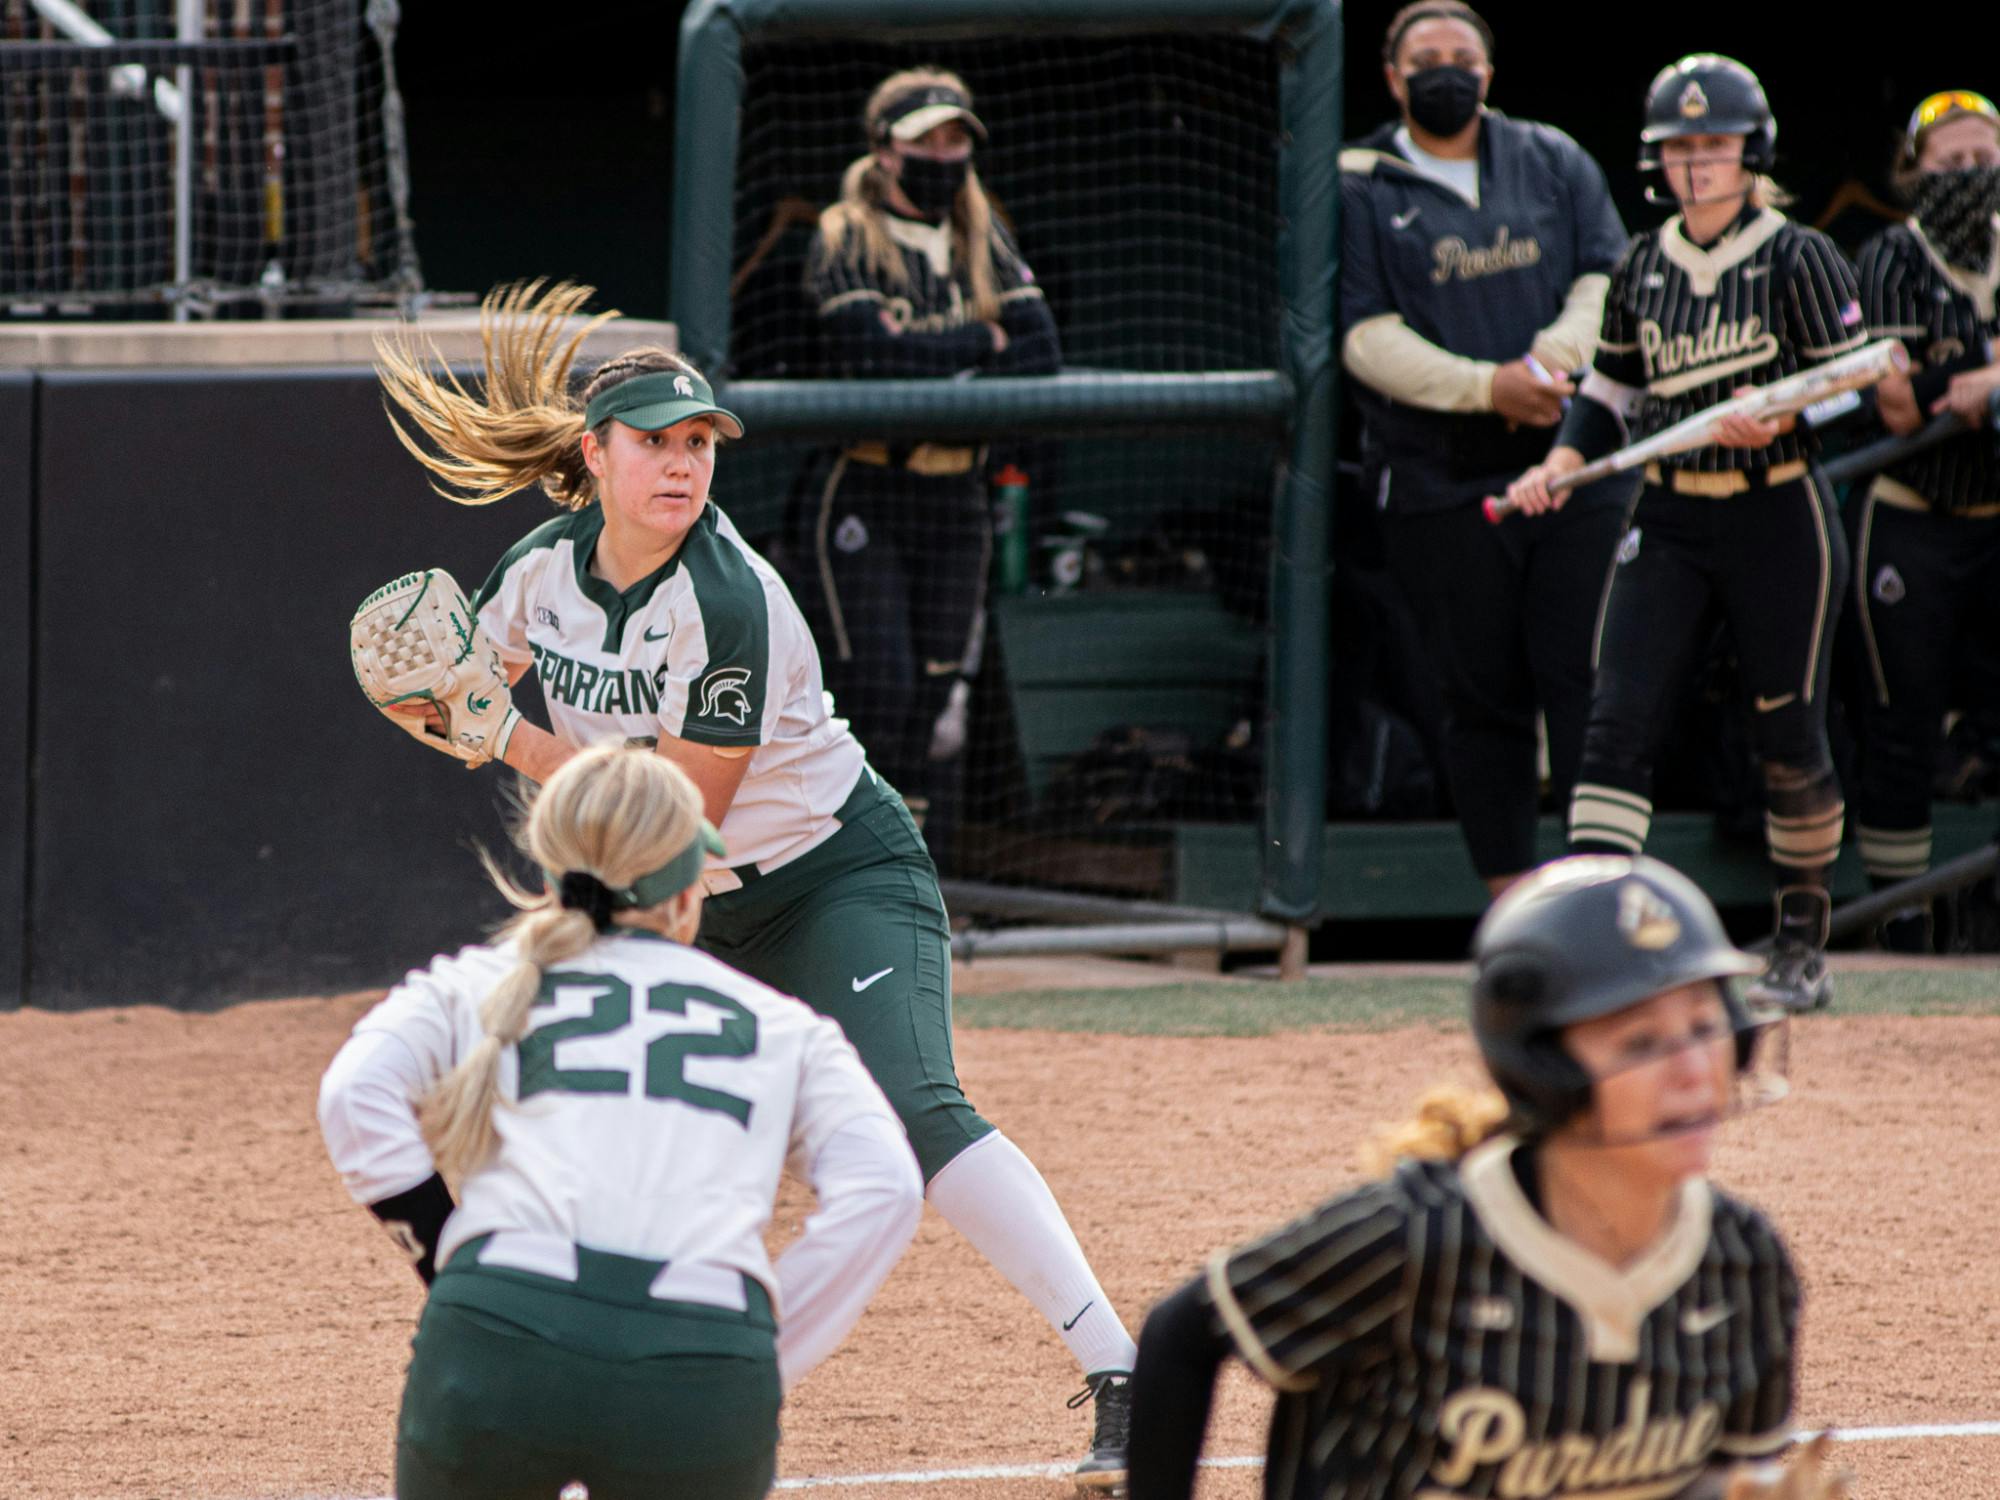 Michigan State freshman Alexis Barroso looks to throw to first and secure a double-play, after catching a pop-up near home on April 23, 2021. The Spartans fell to Purdue 8-7.